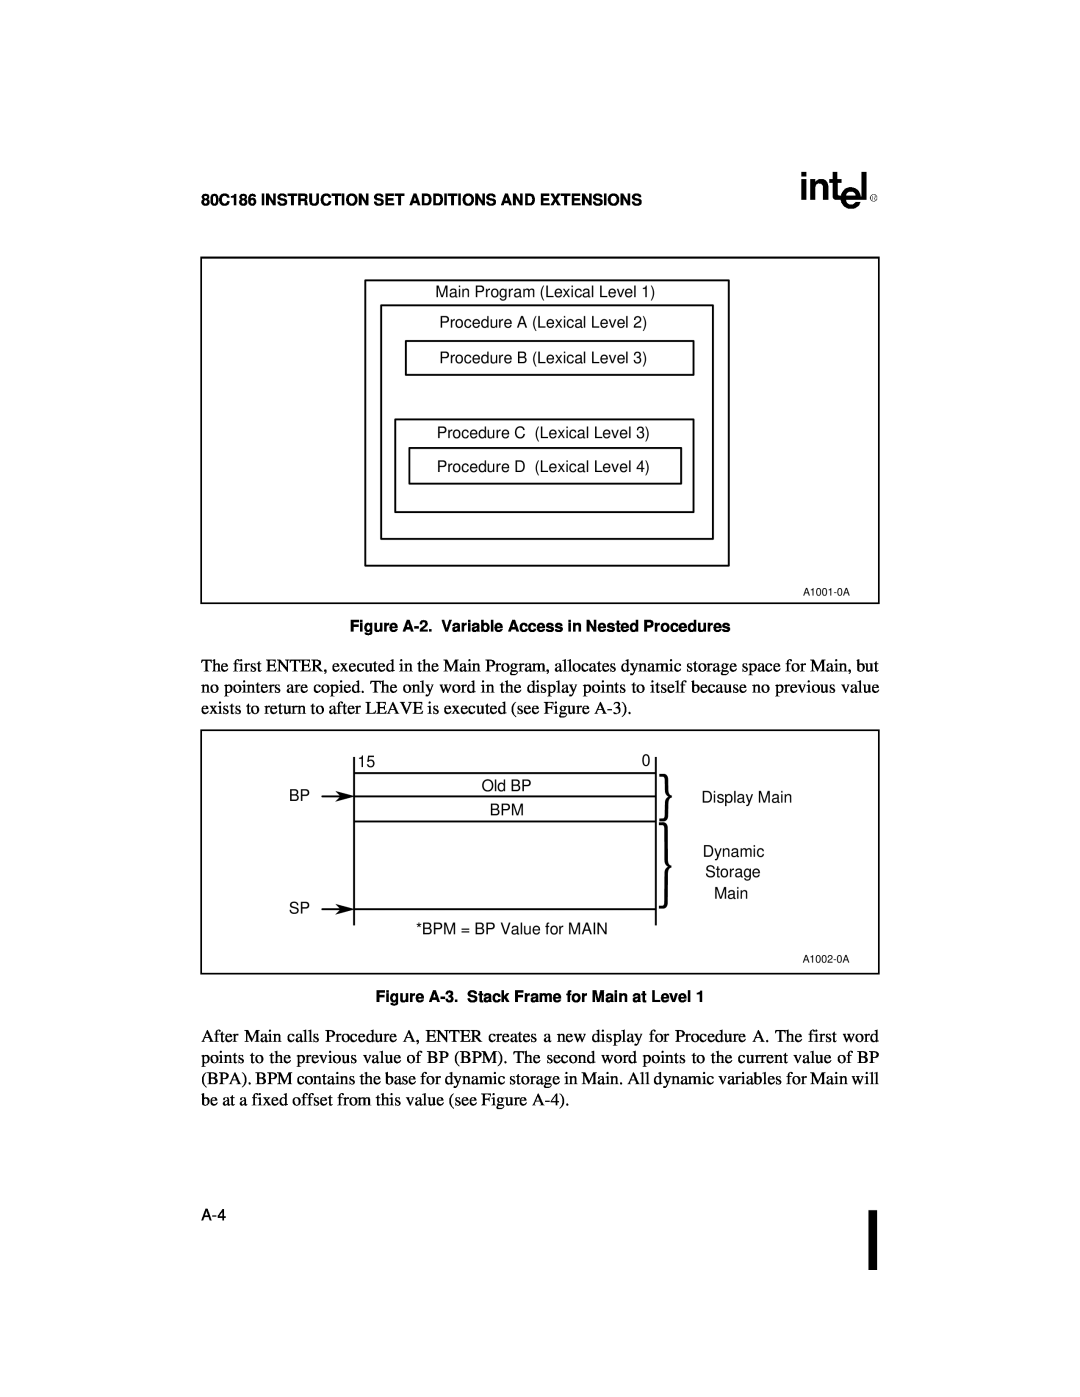 Intel 80C186XL, 80C188XL 80C186 INSTRUCTION SET ADDITIONS AND EXTENSIONS, Figure A-2.Variable Access in Nested Procedures 